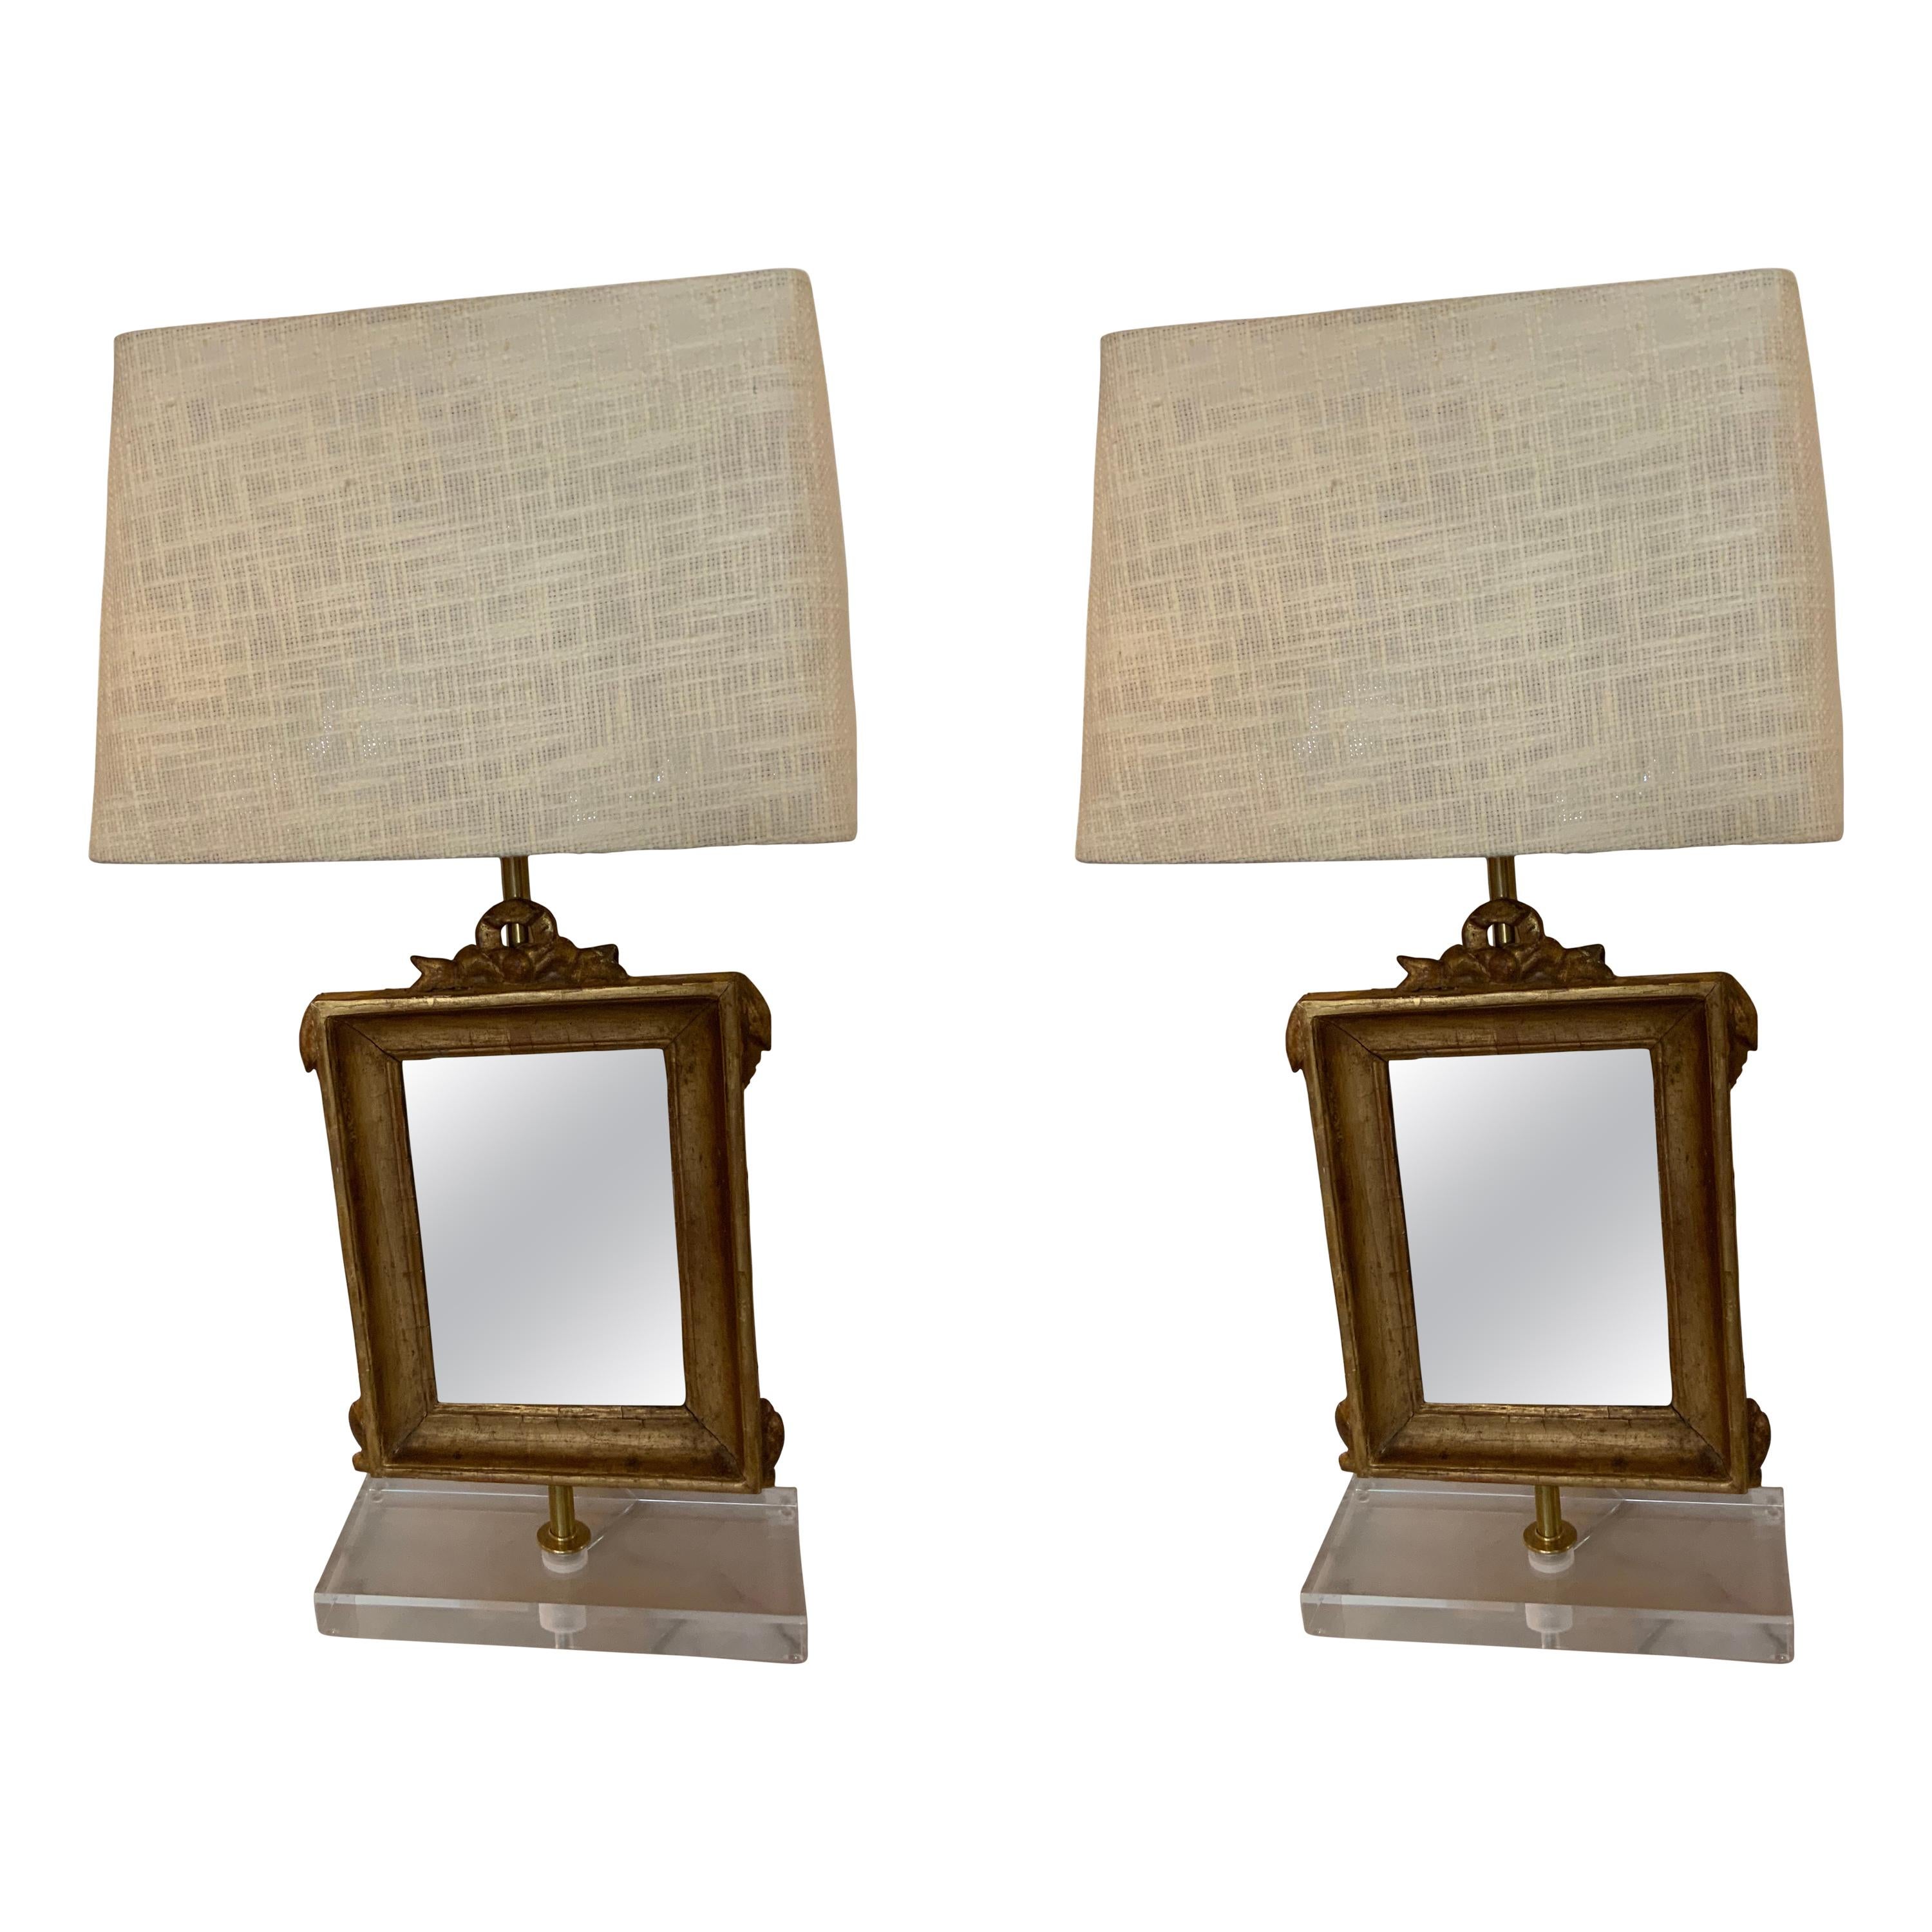 Pair of Giltwood 19th C. Mirrors, Mounted as Lamps on Acrylic Bases